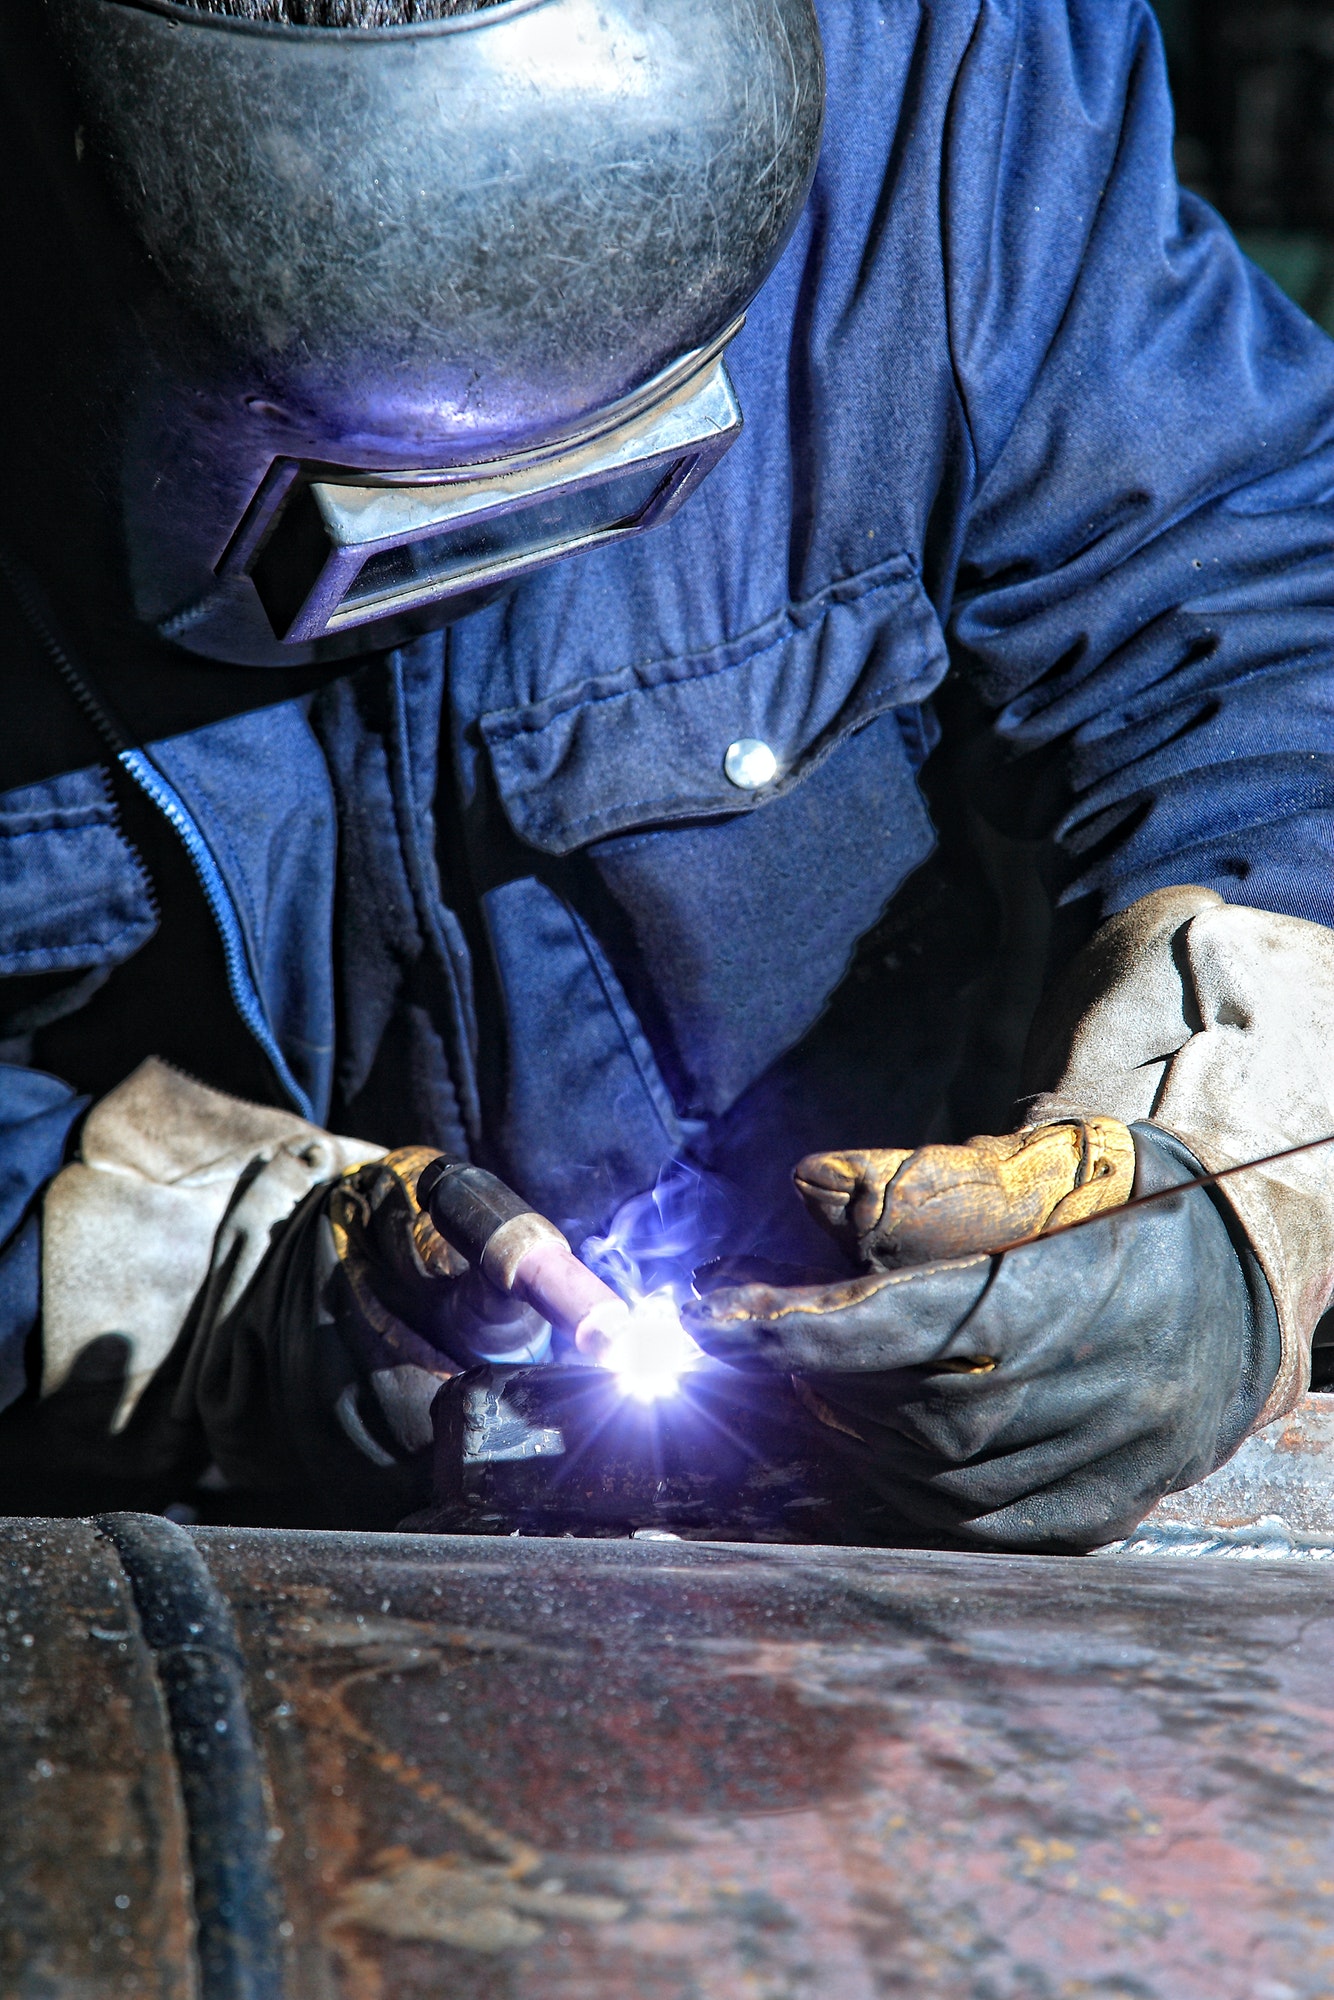 Welding and bright sparks.